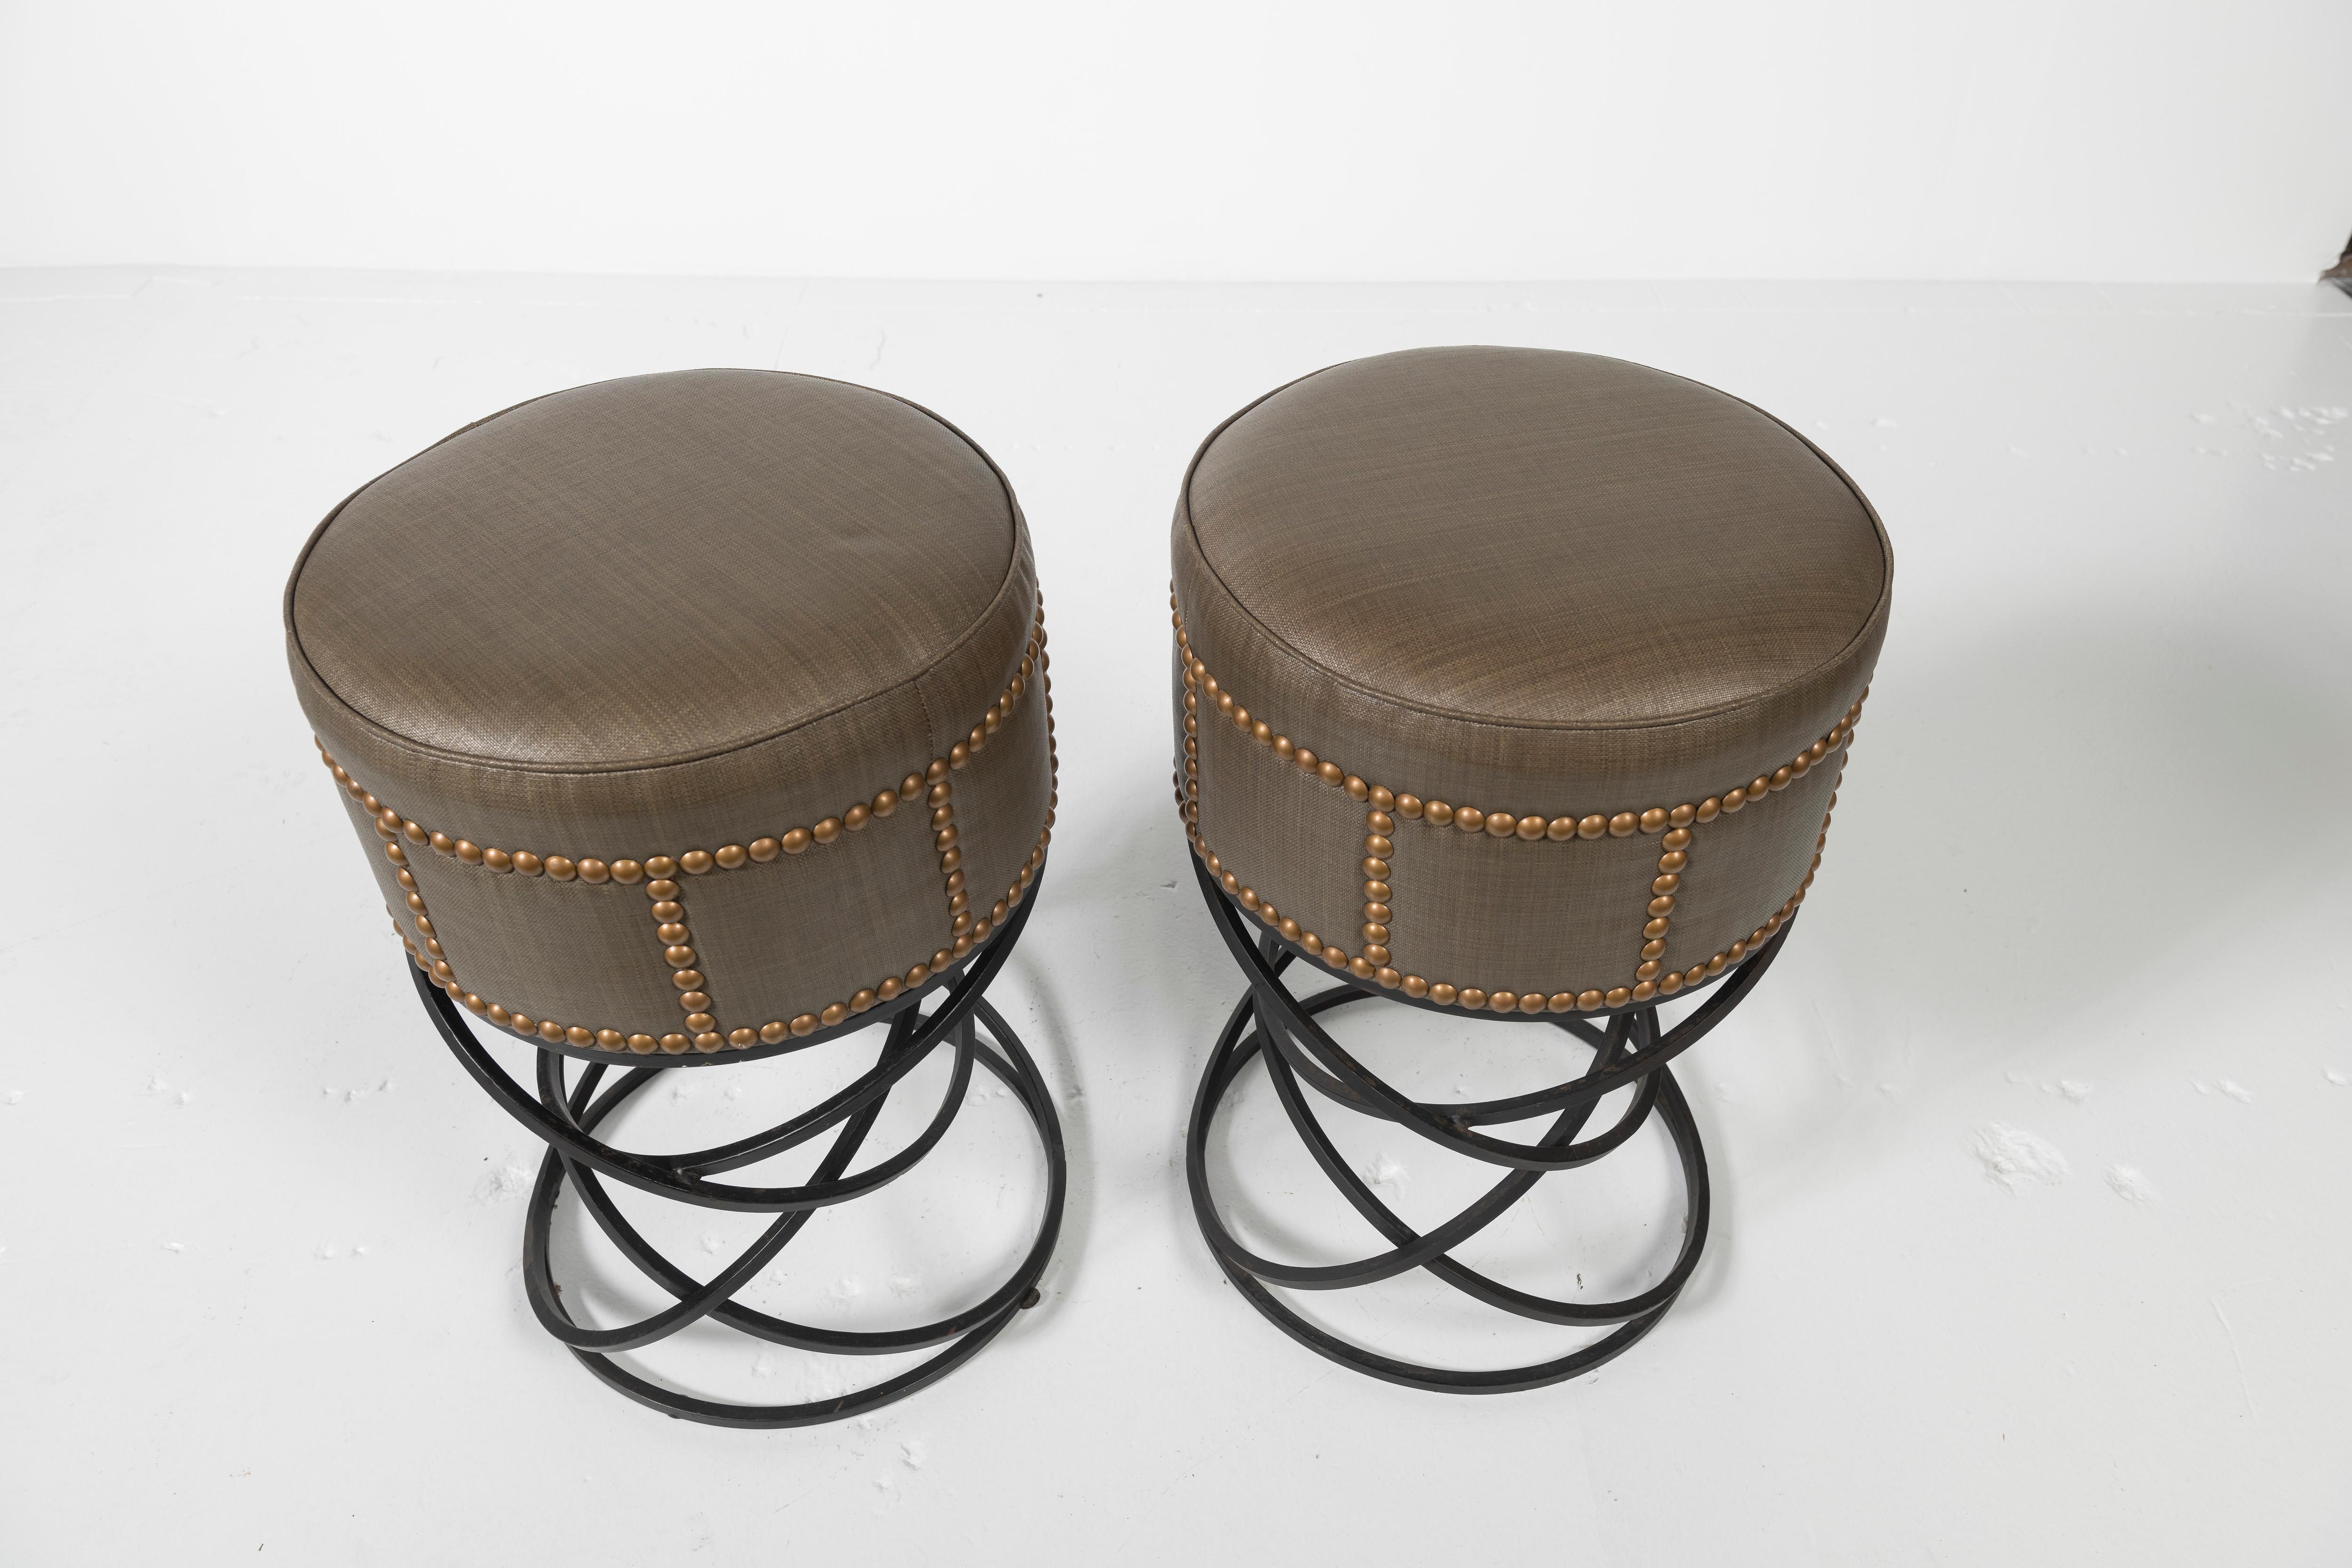 Pair of Modern Studded Leather Bar Stools with a whimsical iron base. Statement pieces for a bar or kitchen counter.